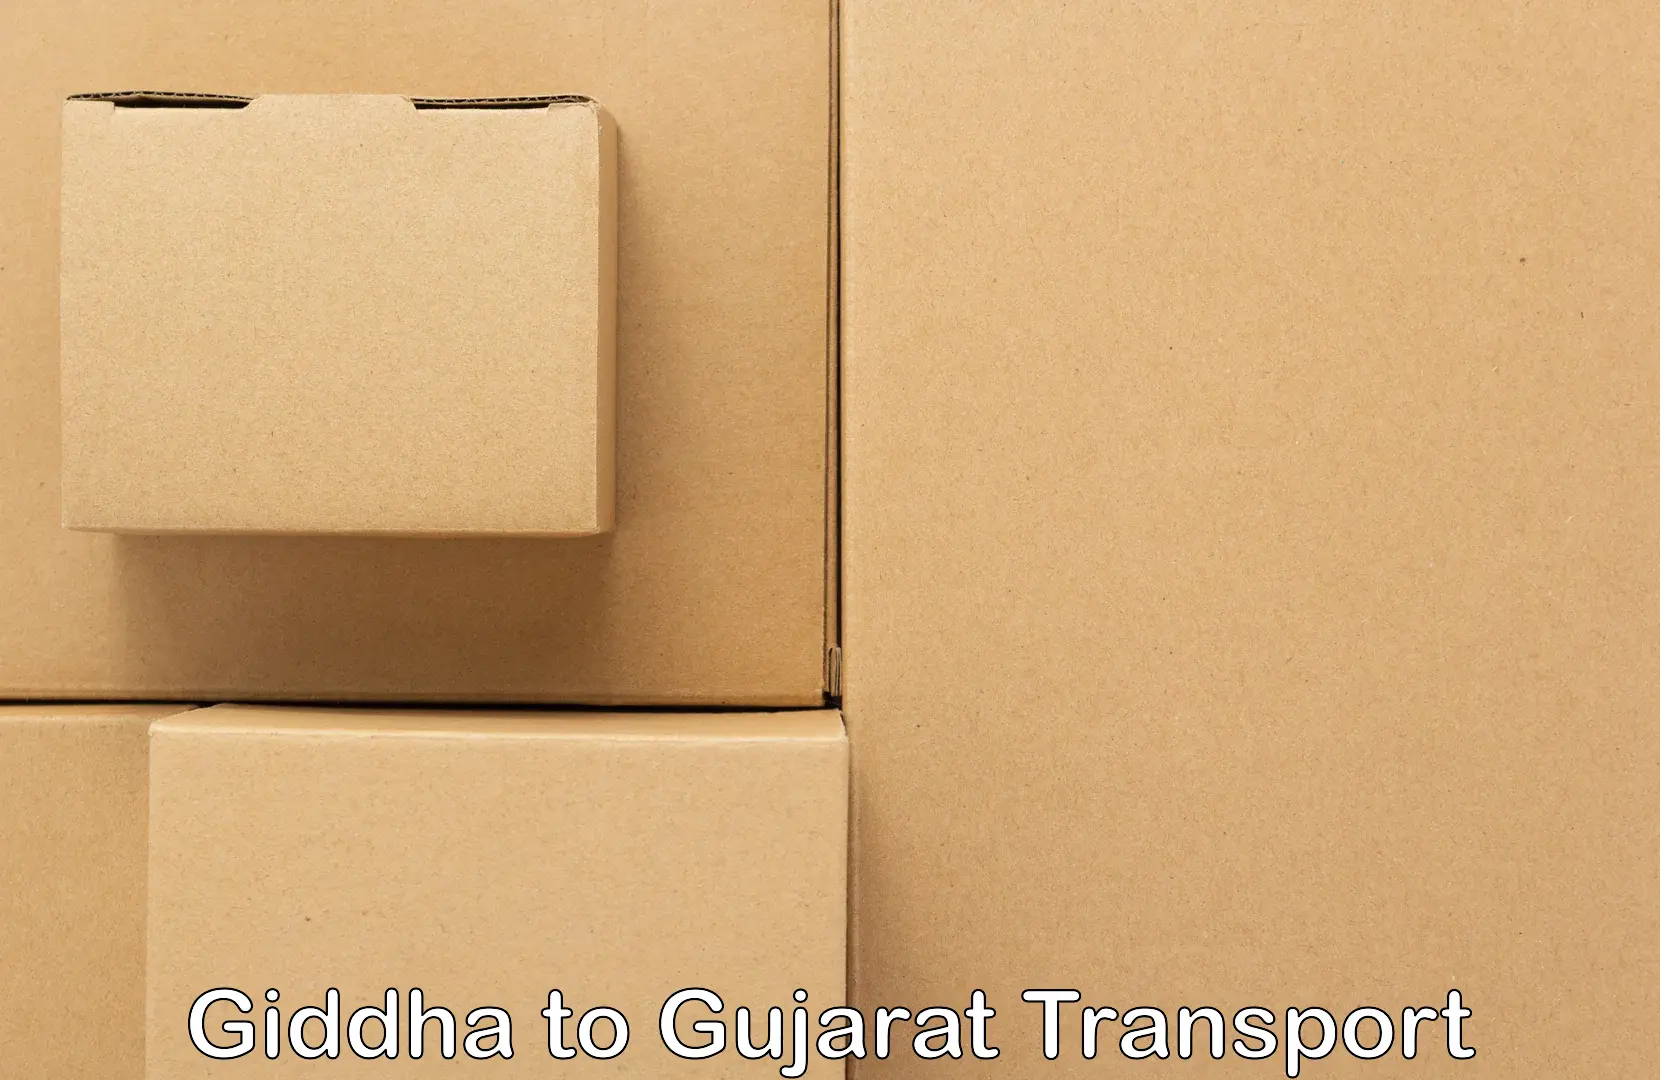 Daily transport service Giddha to Bharuch